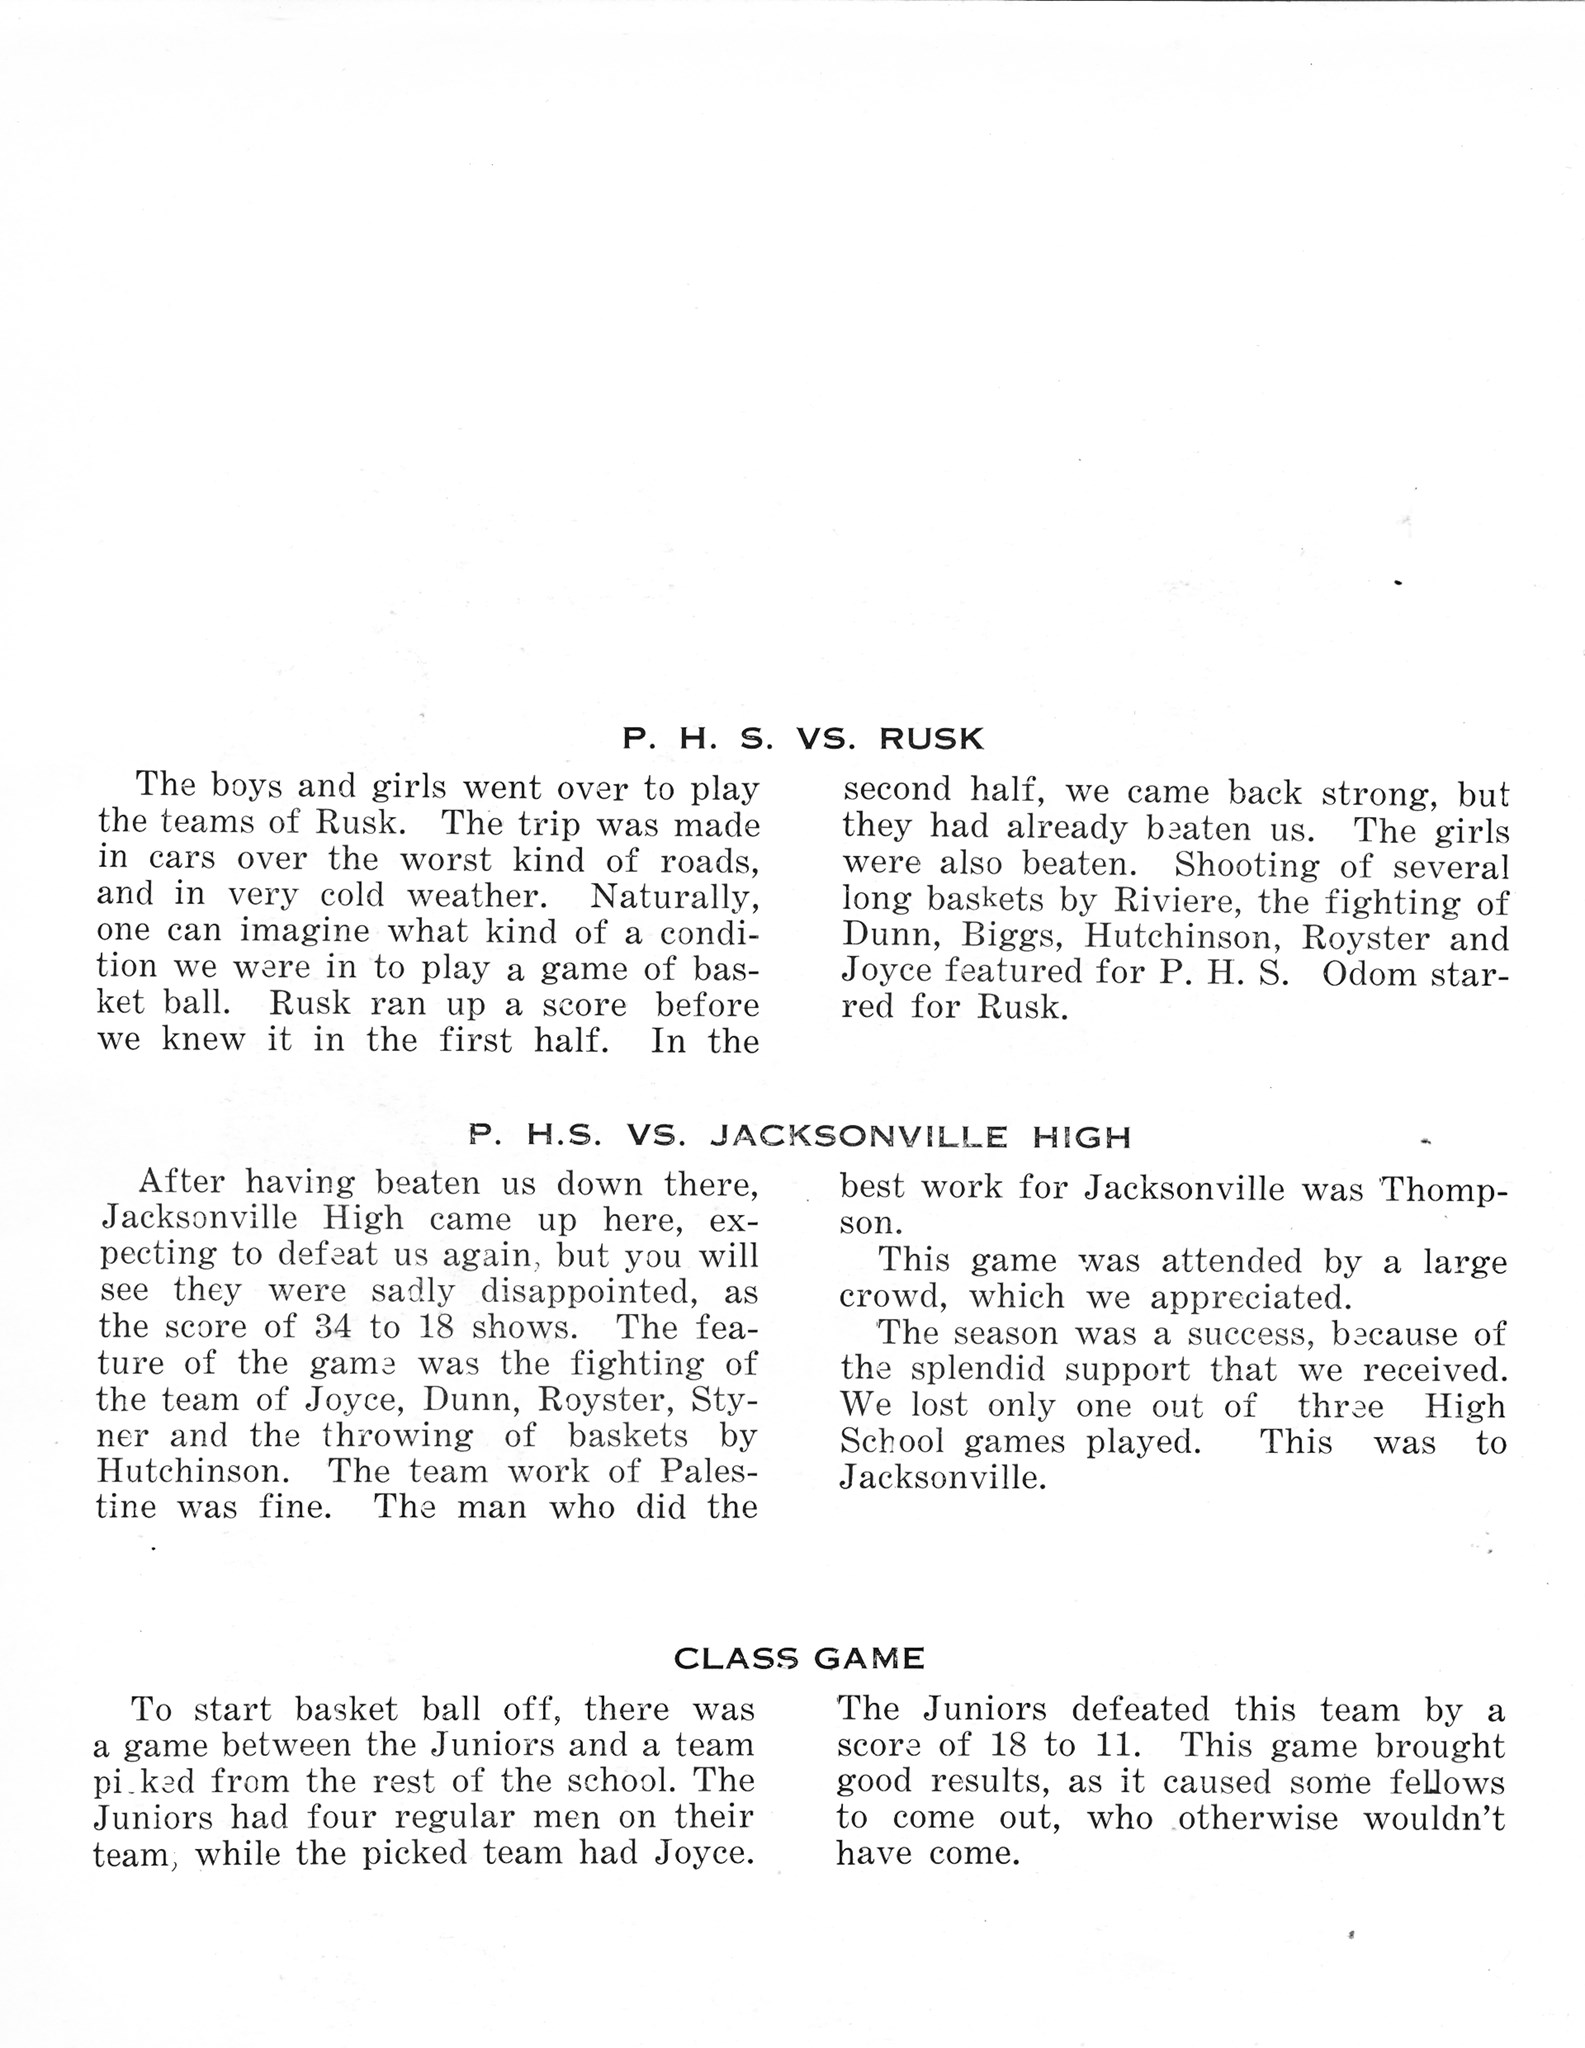 ../../../Images/Large/1919/Arclight-1919-pg0076.jpg